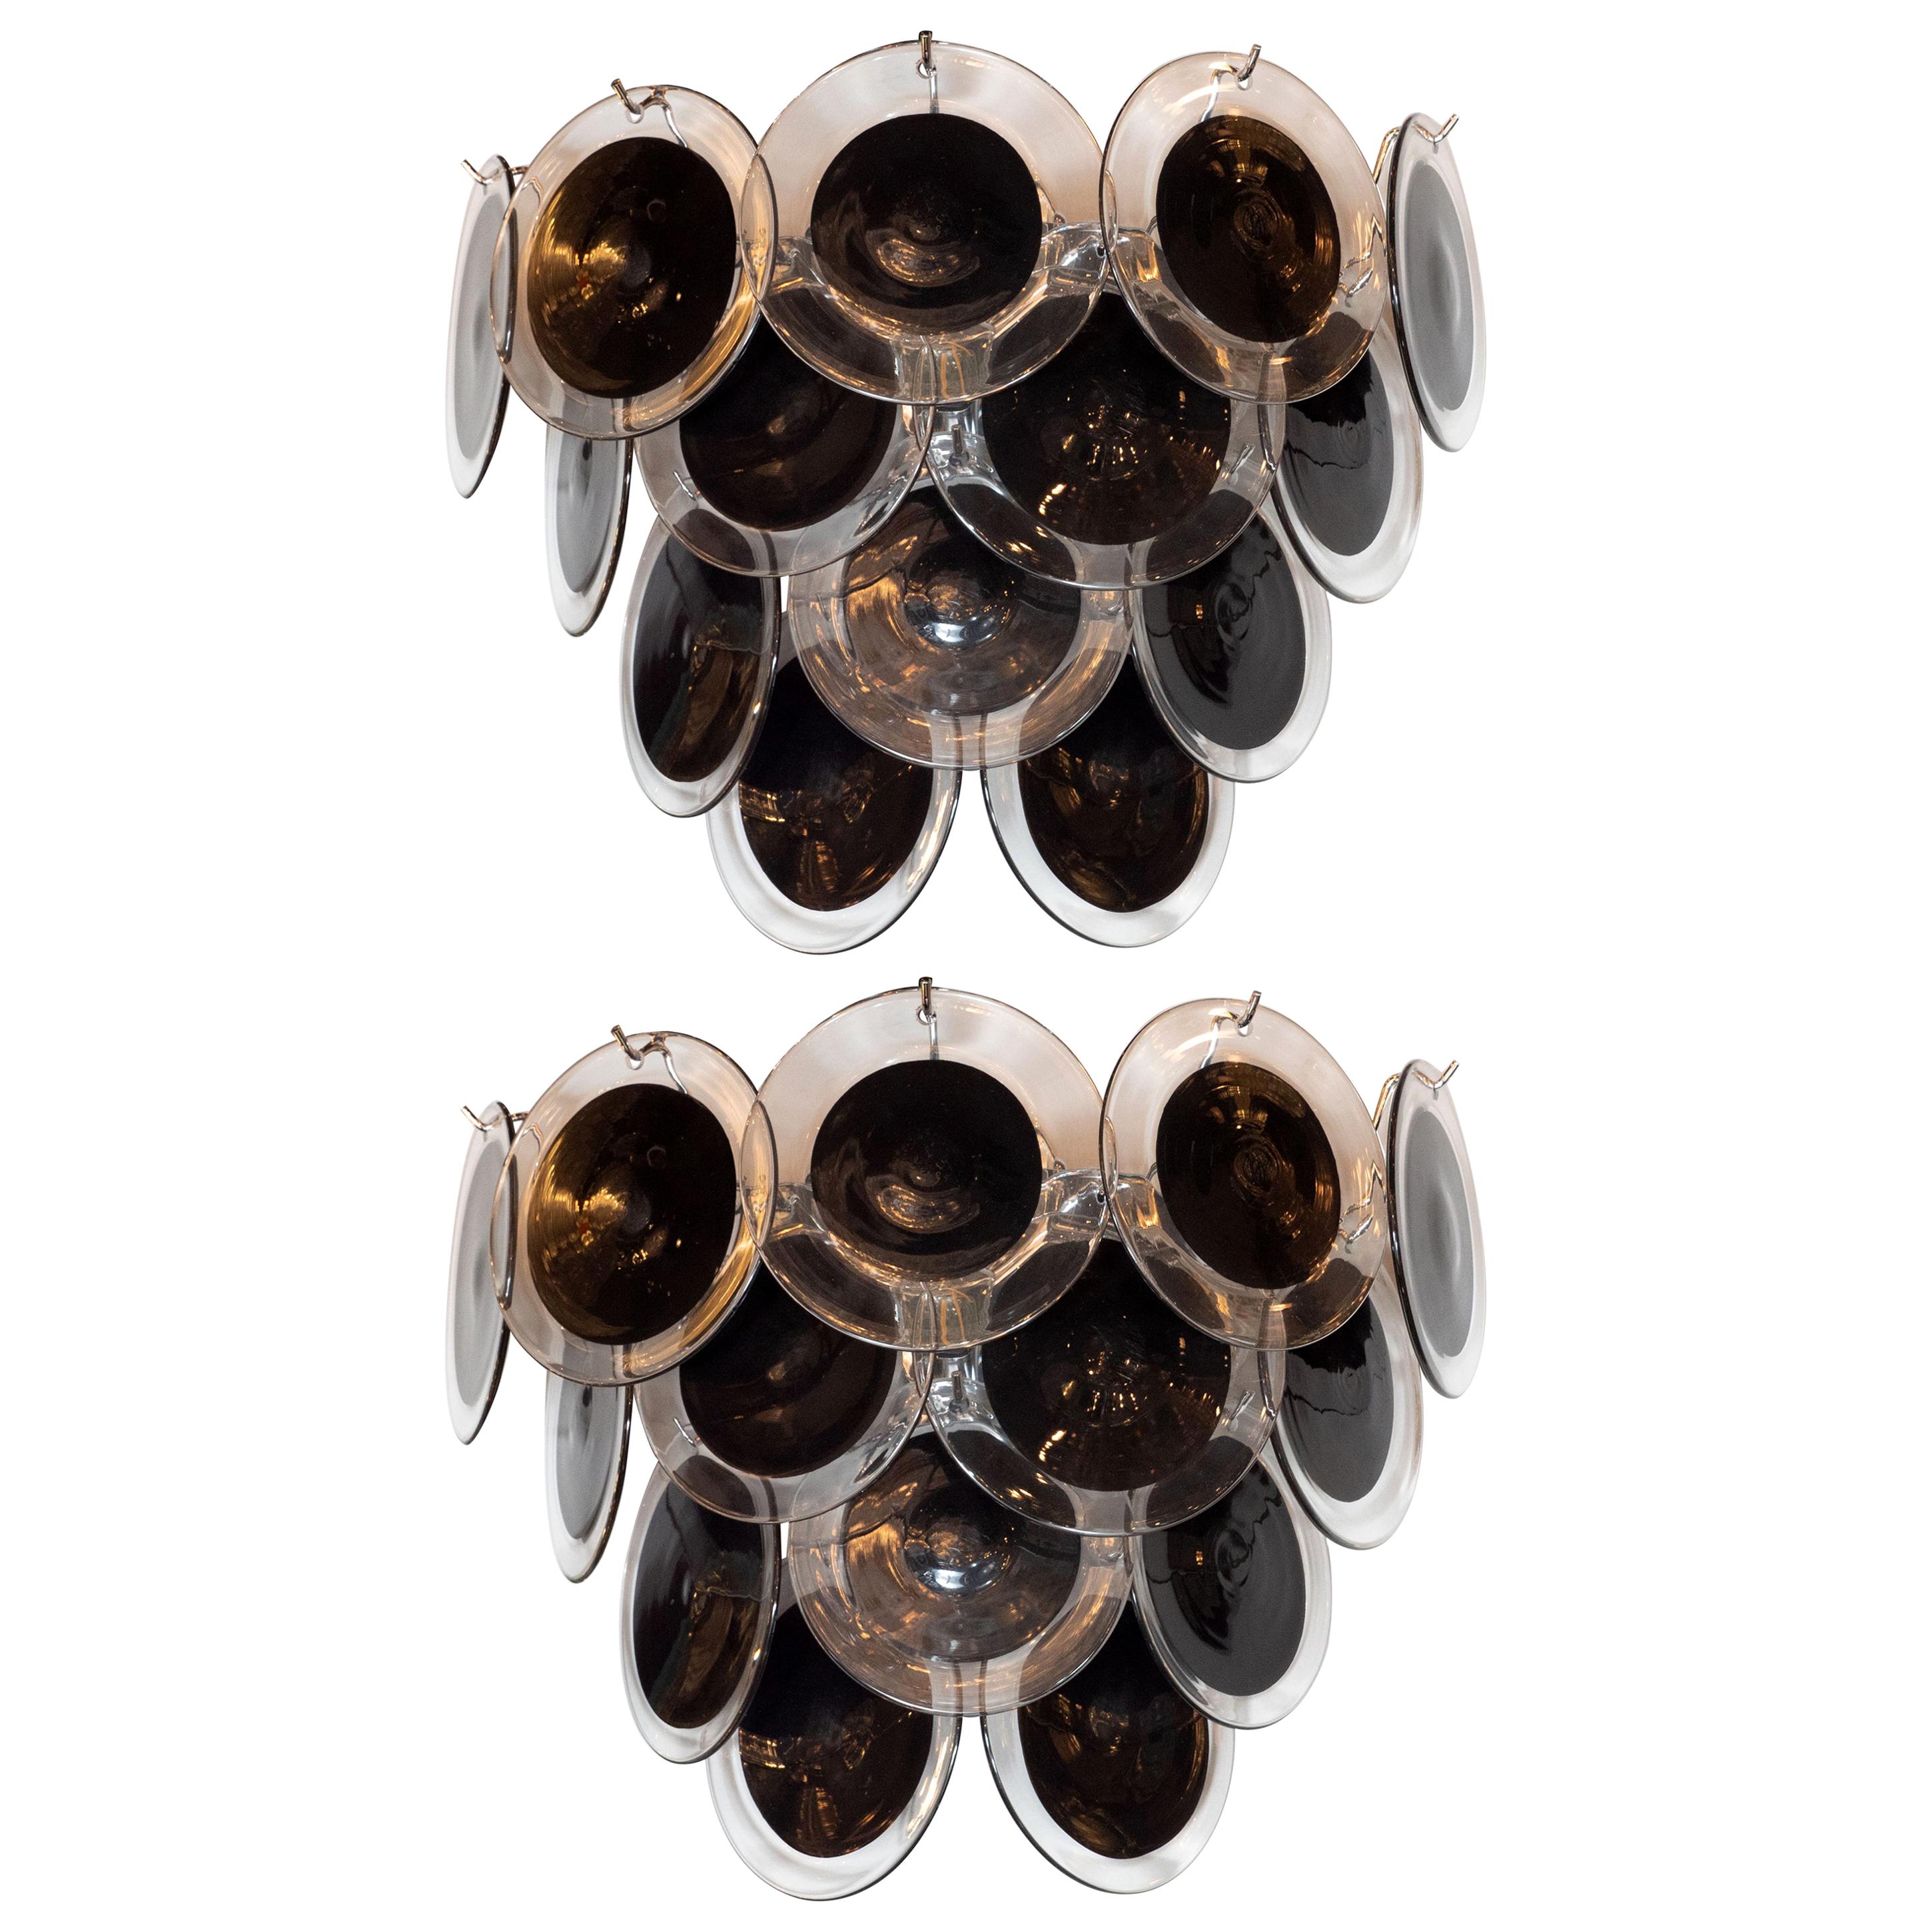 Pair of Modernist 14-Disc Sconces in Handblown Murano Black & Translucent Glass For Sale